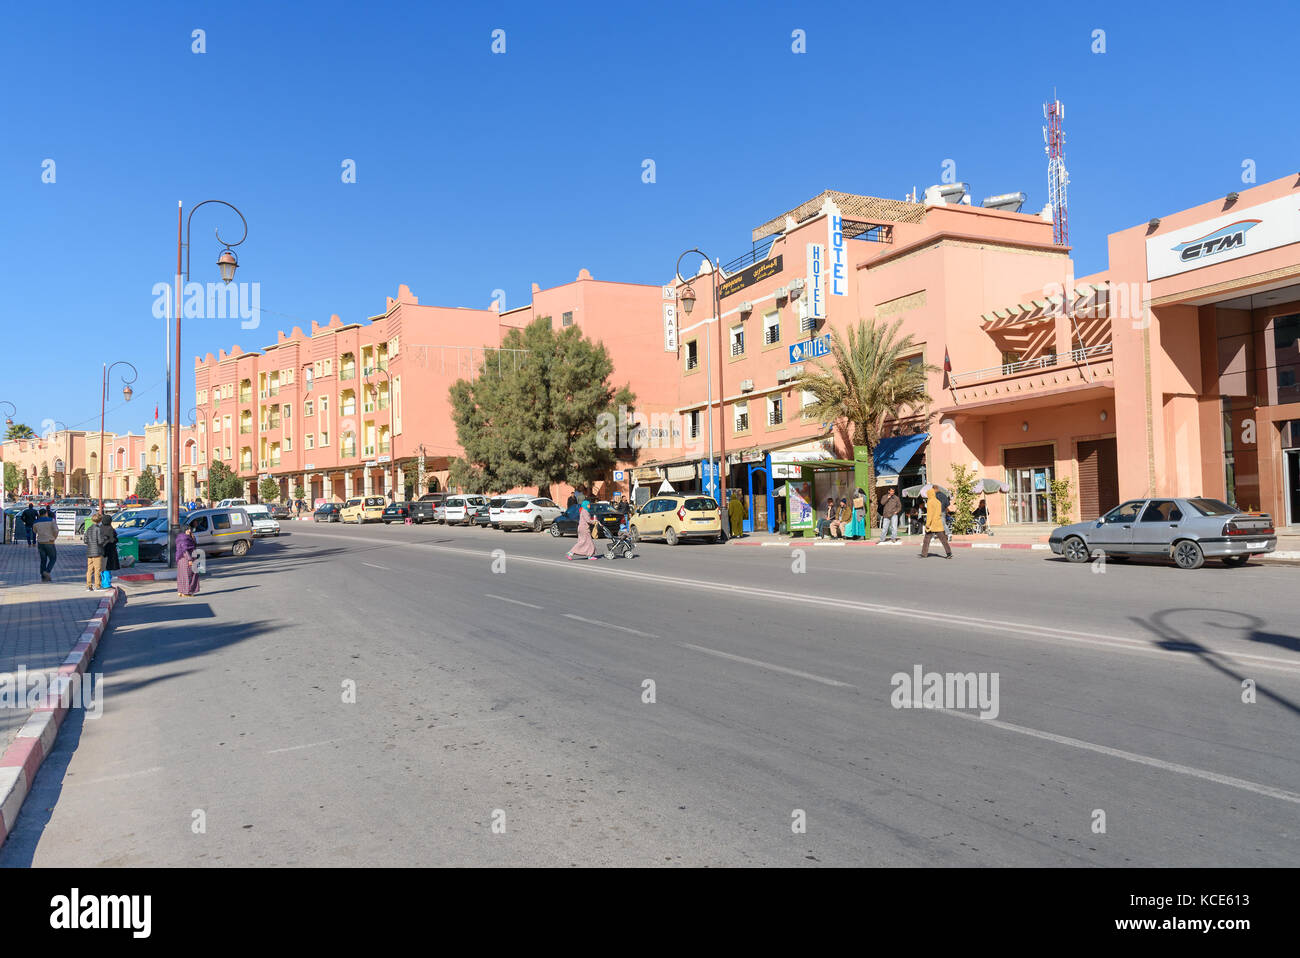 Ouarzazate, Morocco - Jan 4, 2017: View on Avenue Mohammed V. Ouarzazate area is film-making location, where Morocco's biggest studios Stock Photo